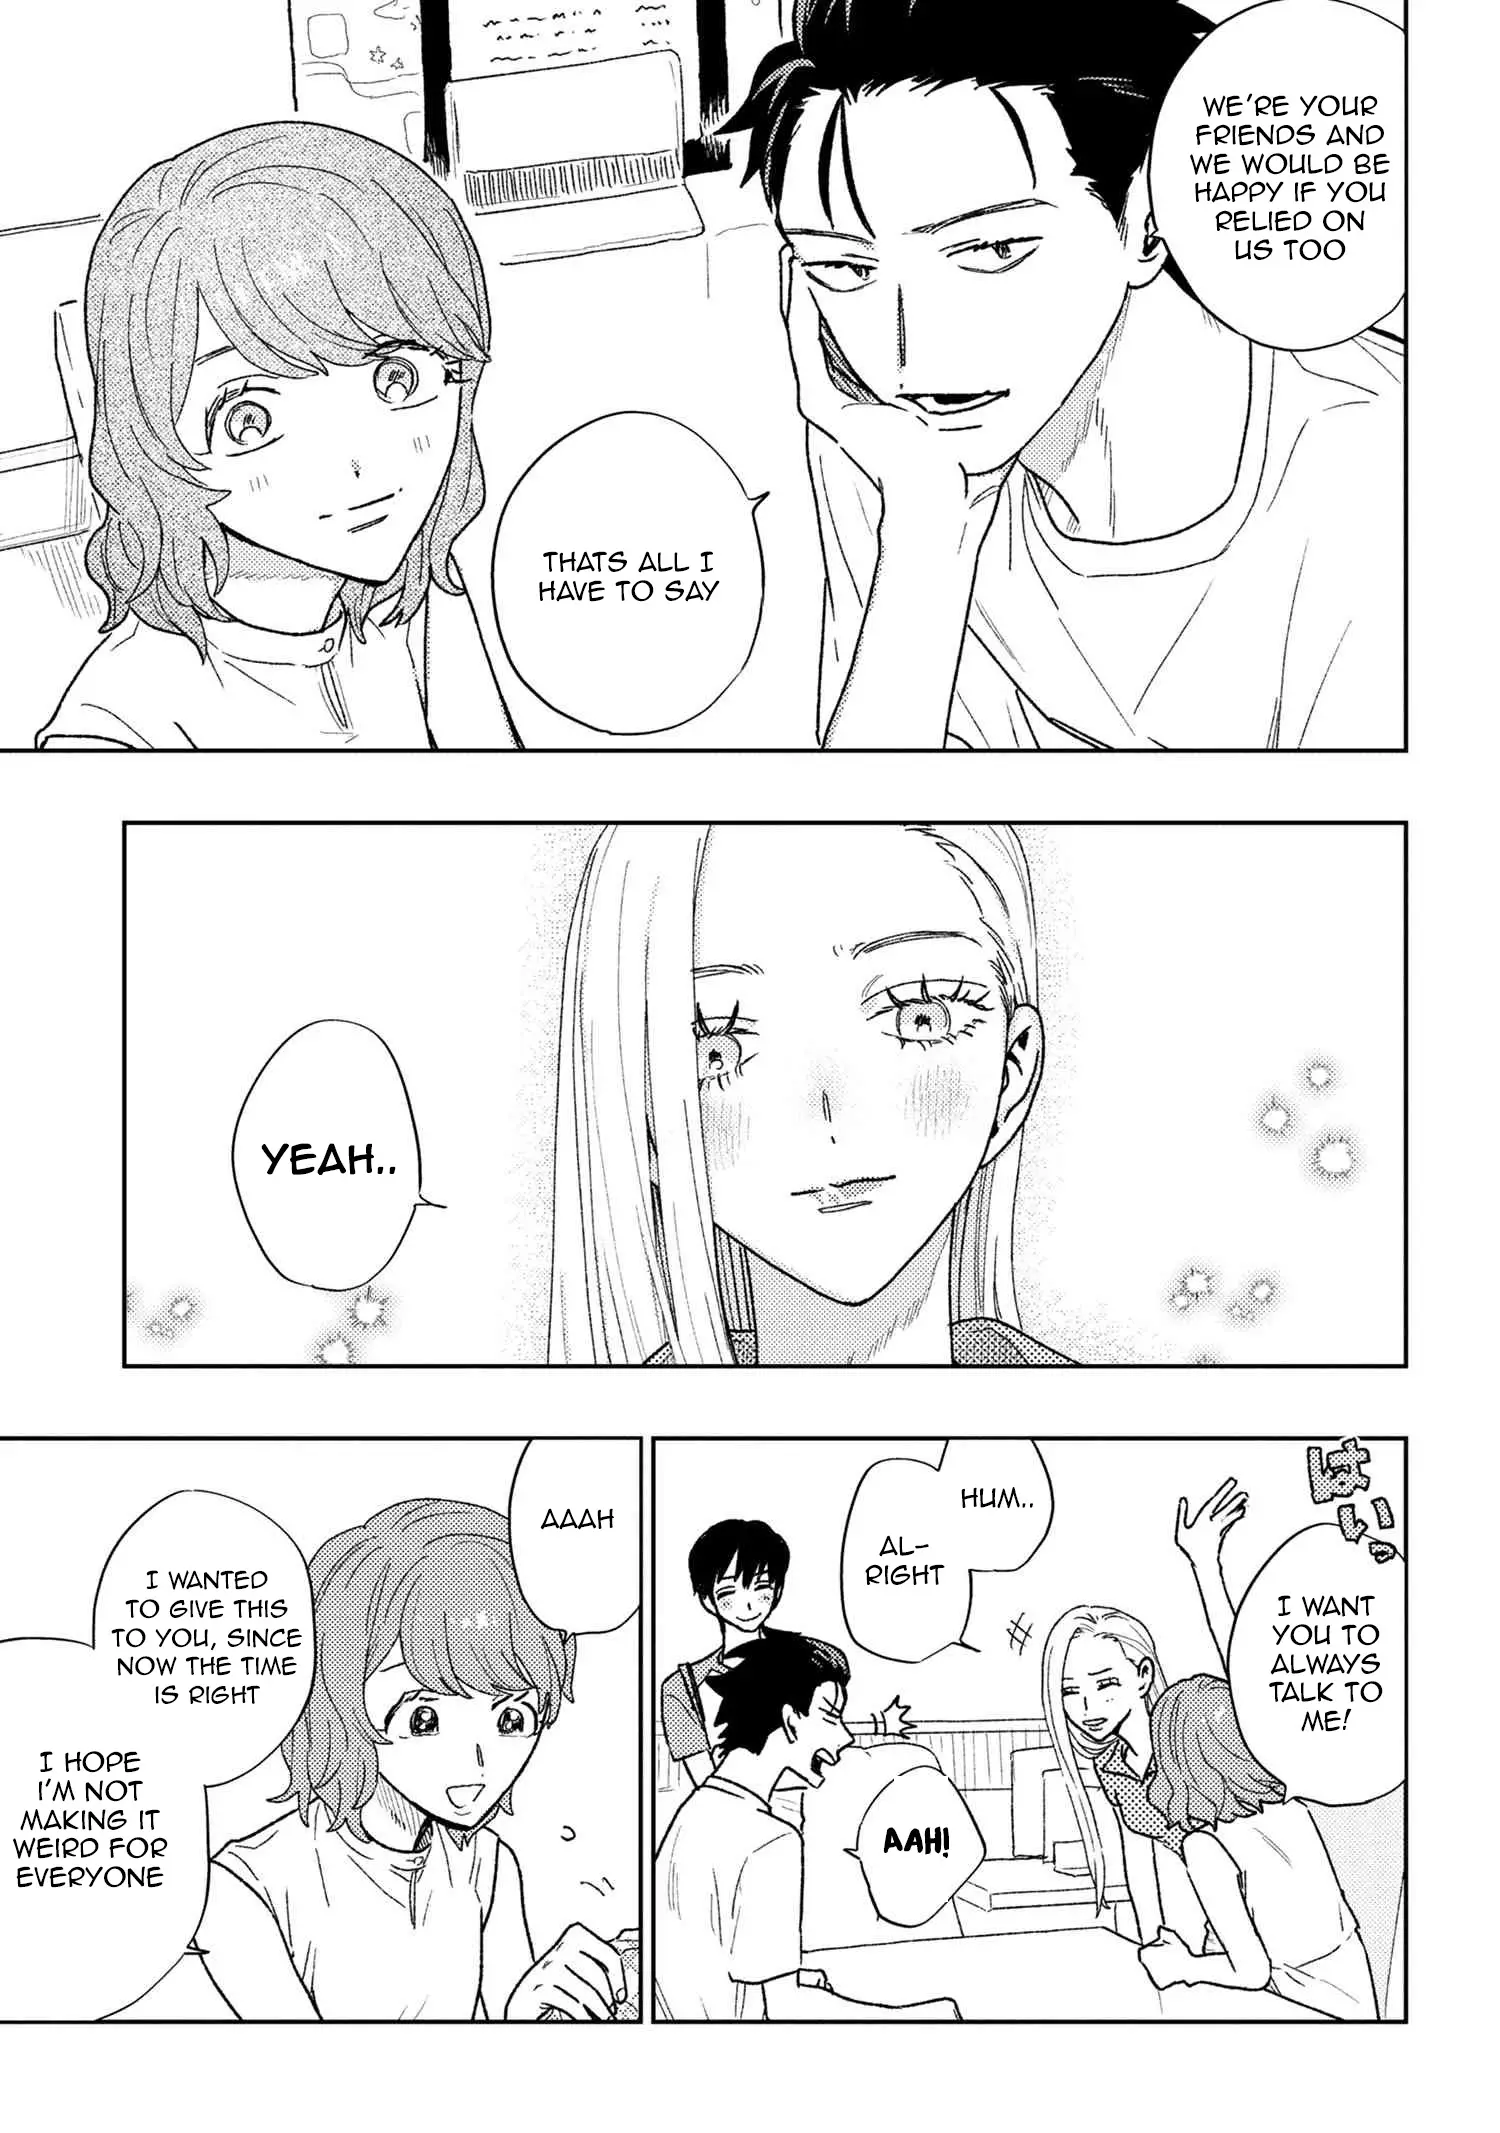 I Love You, Miki! - 27 page 5-21c47d2c